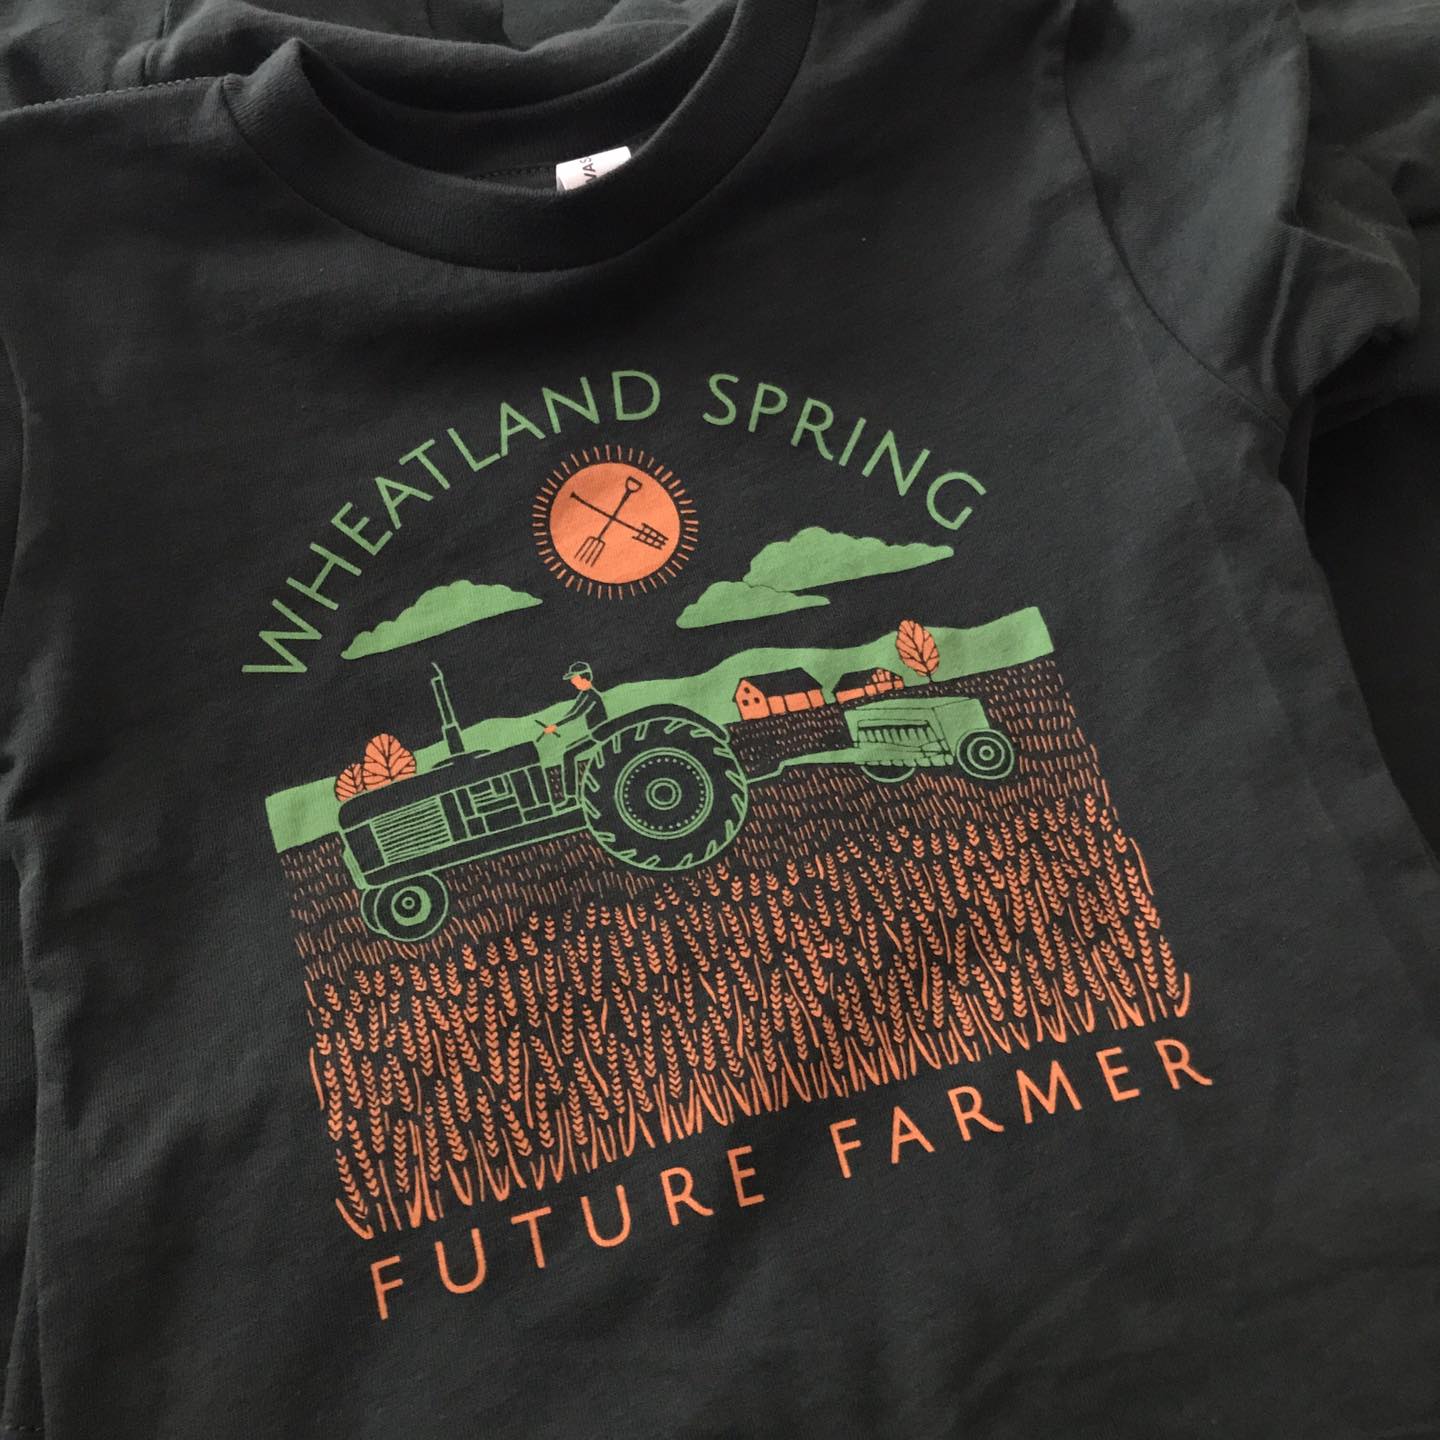 Wheatland Spring Brewery t-shirts by RVA Threads Waterford Virginia